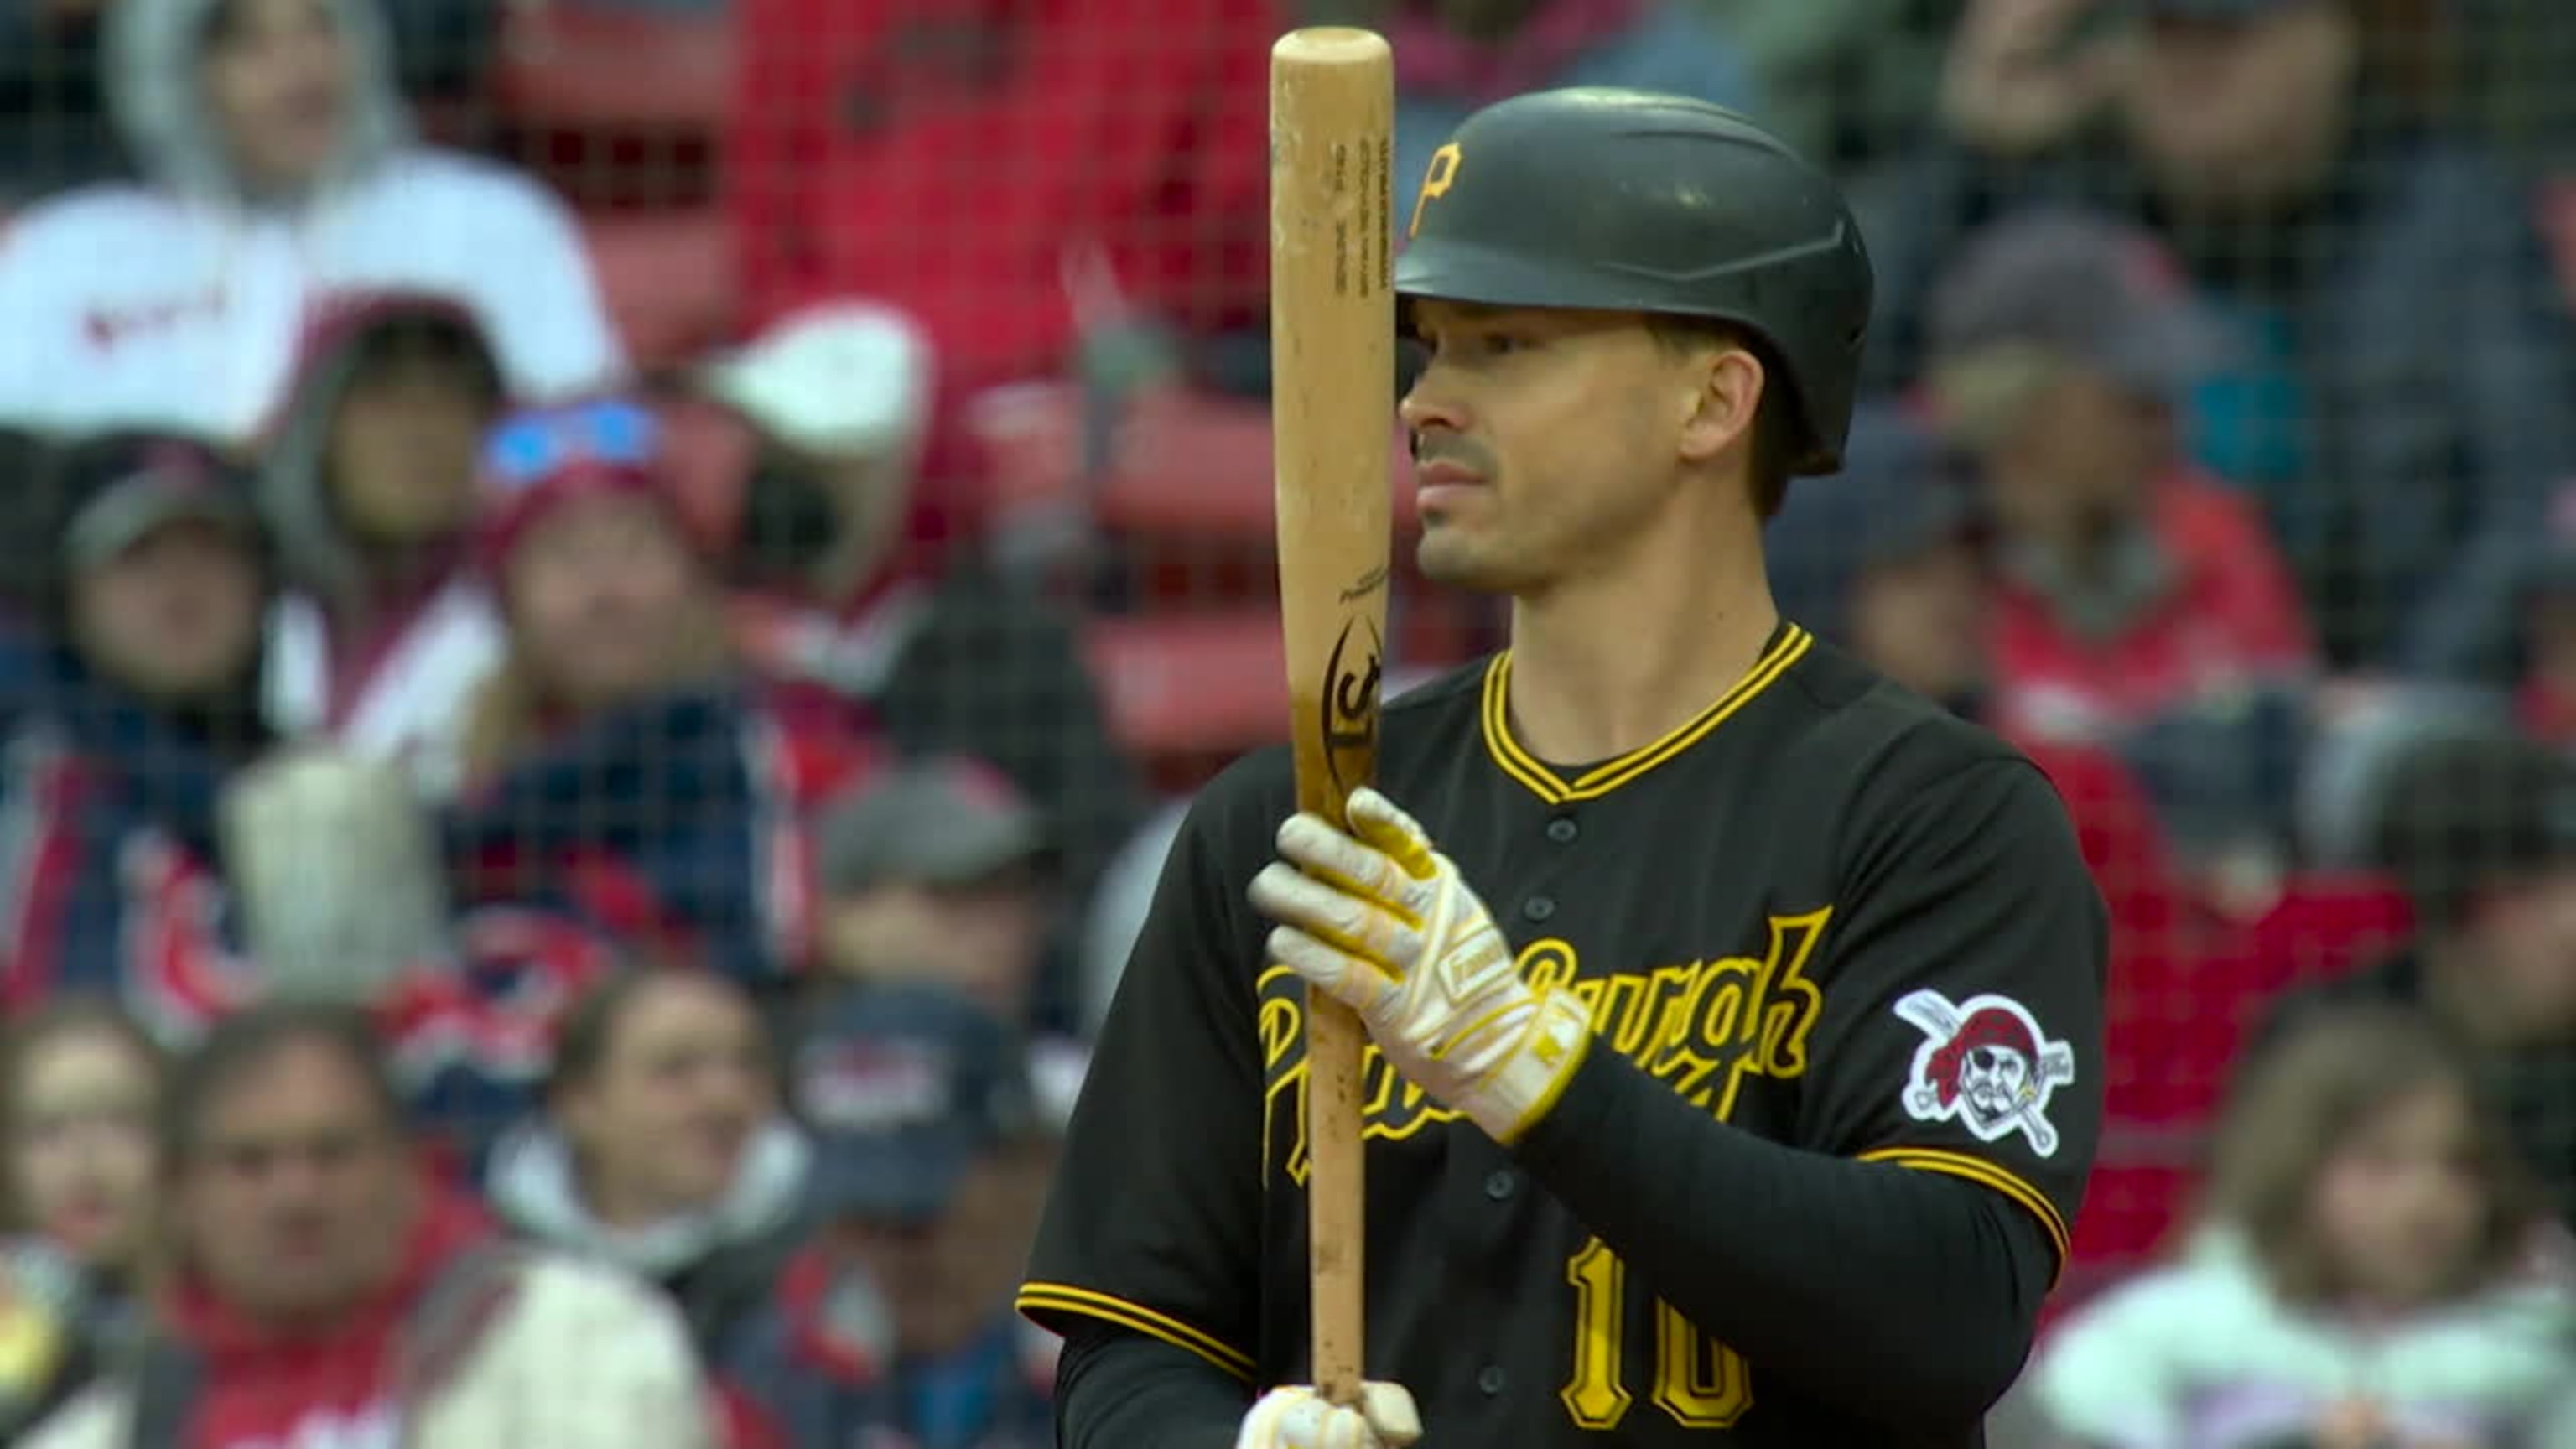 Pirates finish sweep of Red Sox